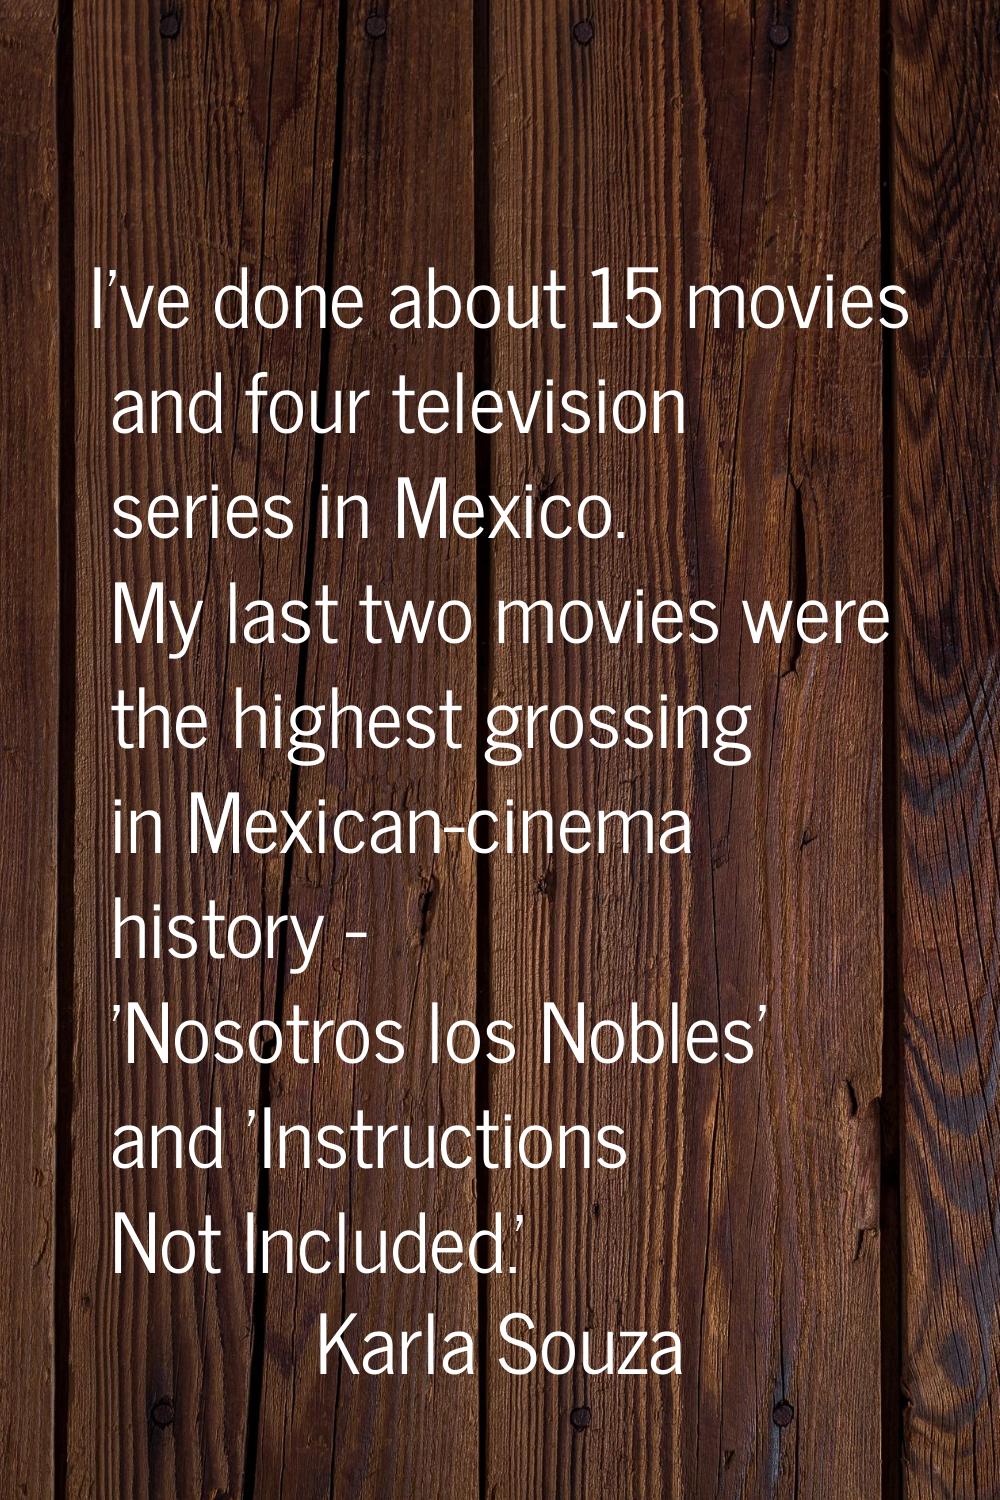 I've done about 15 movies and four television series in Mexico. My last two movies were the highest